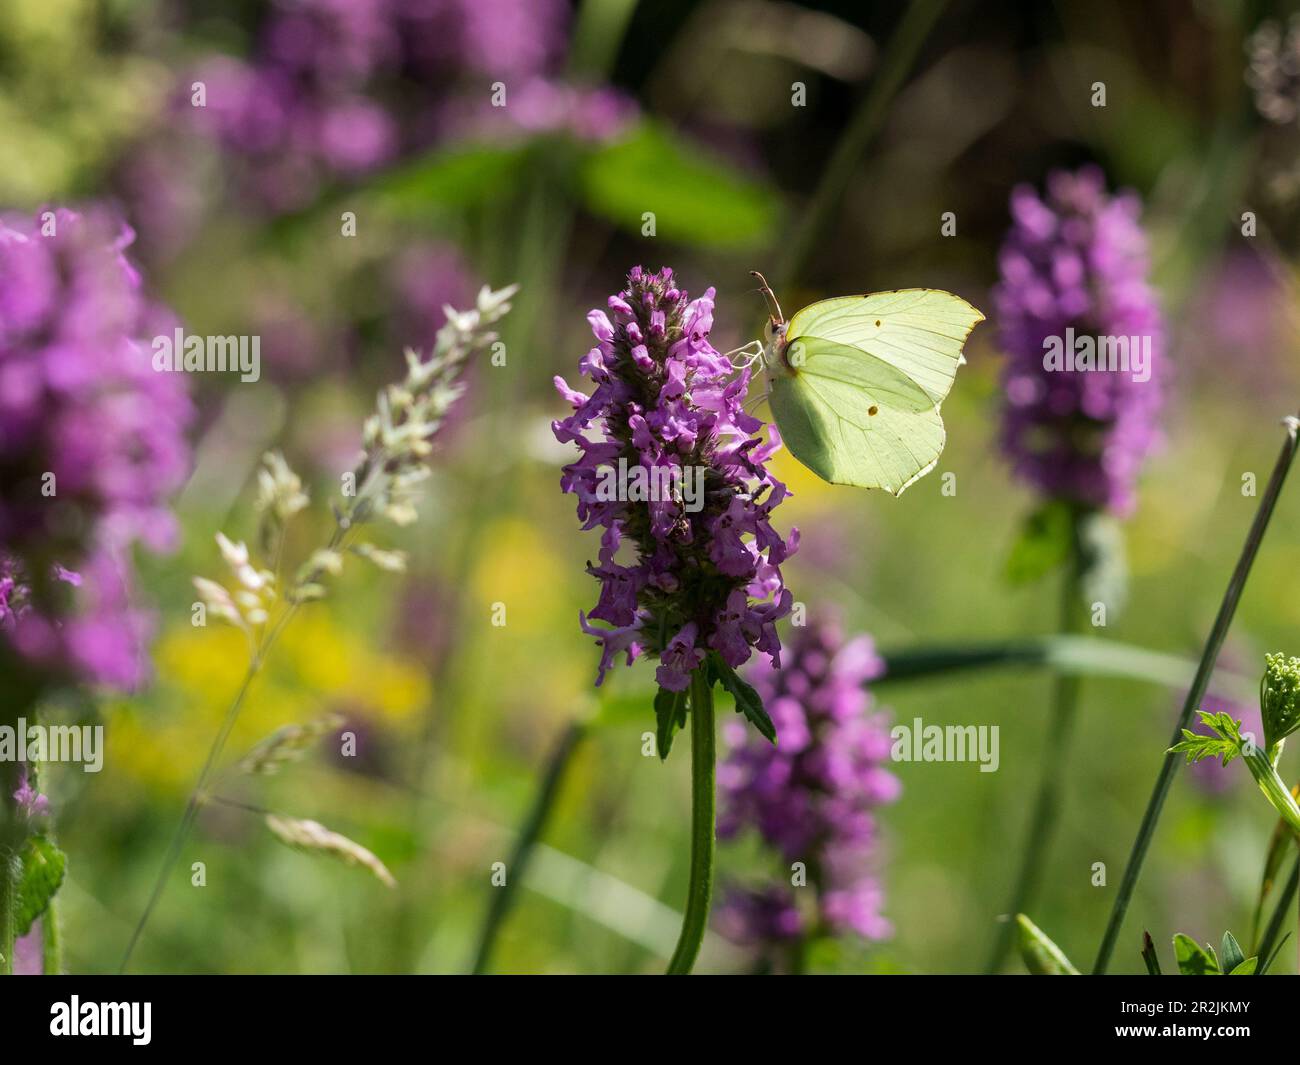 Brimstone butterfly (Gonepteryx rhamni), on Heilziest (Betonica officinalis), spring in the deciduous forest, Upper Bavaria, Germany Stock Photo